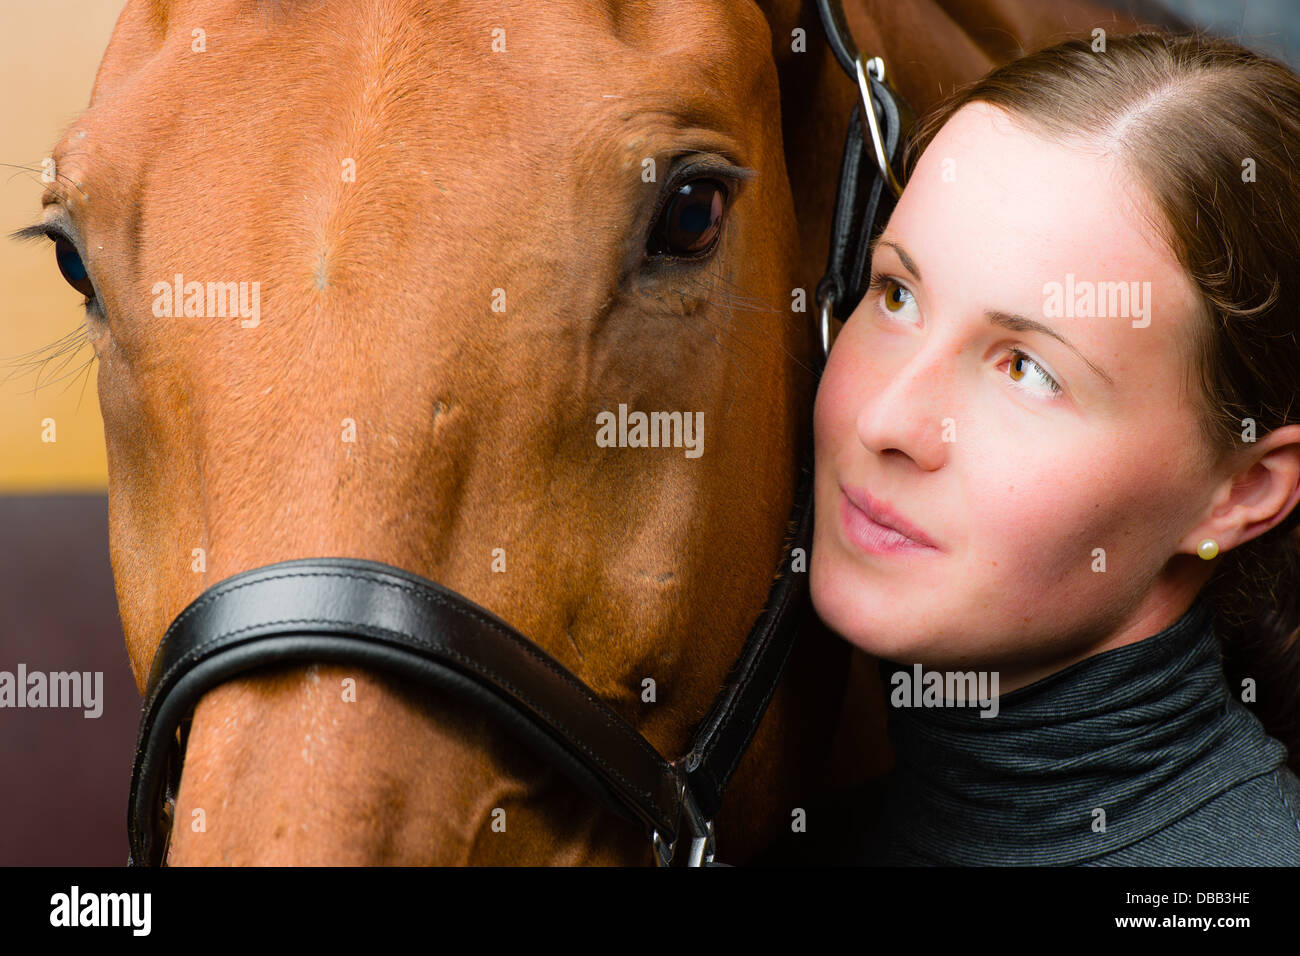 Woman and horse Stock Photo